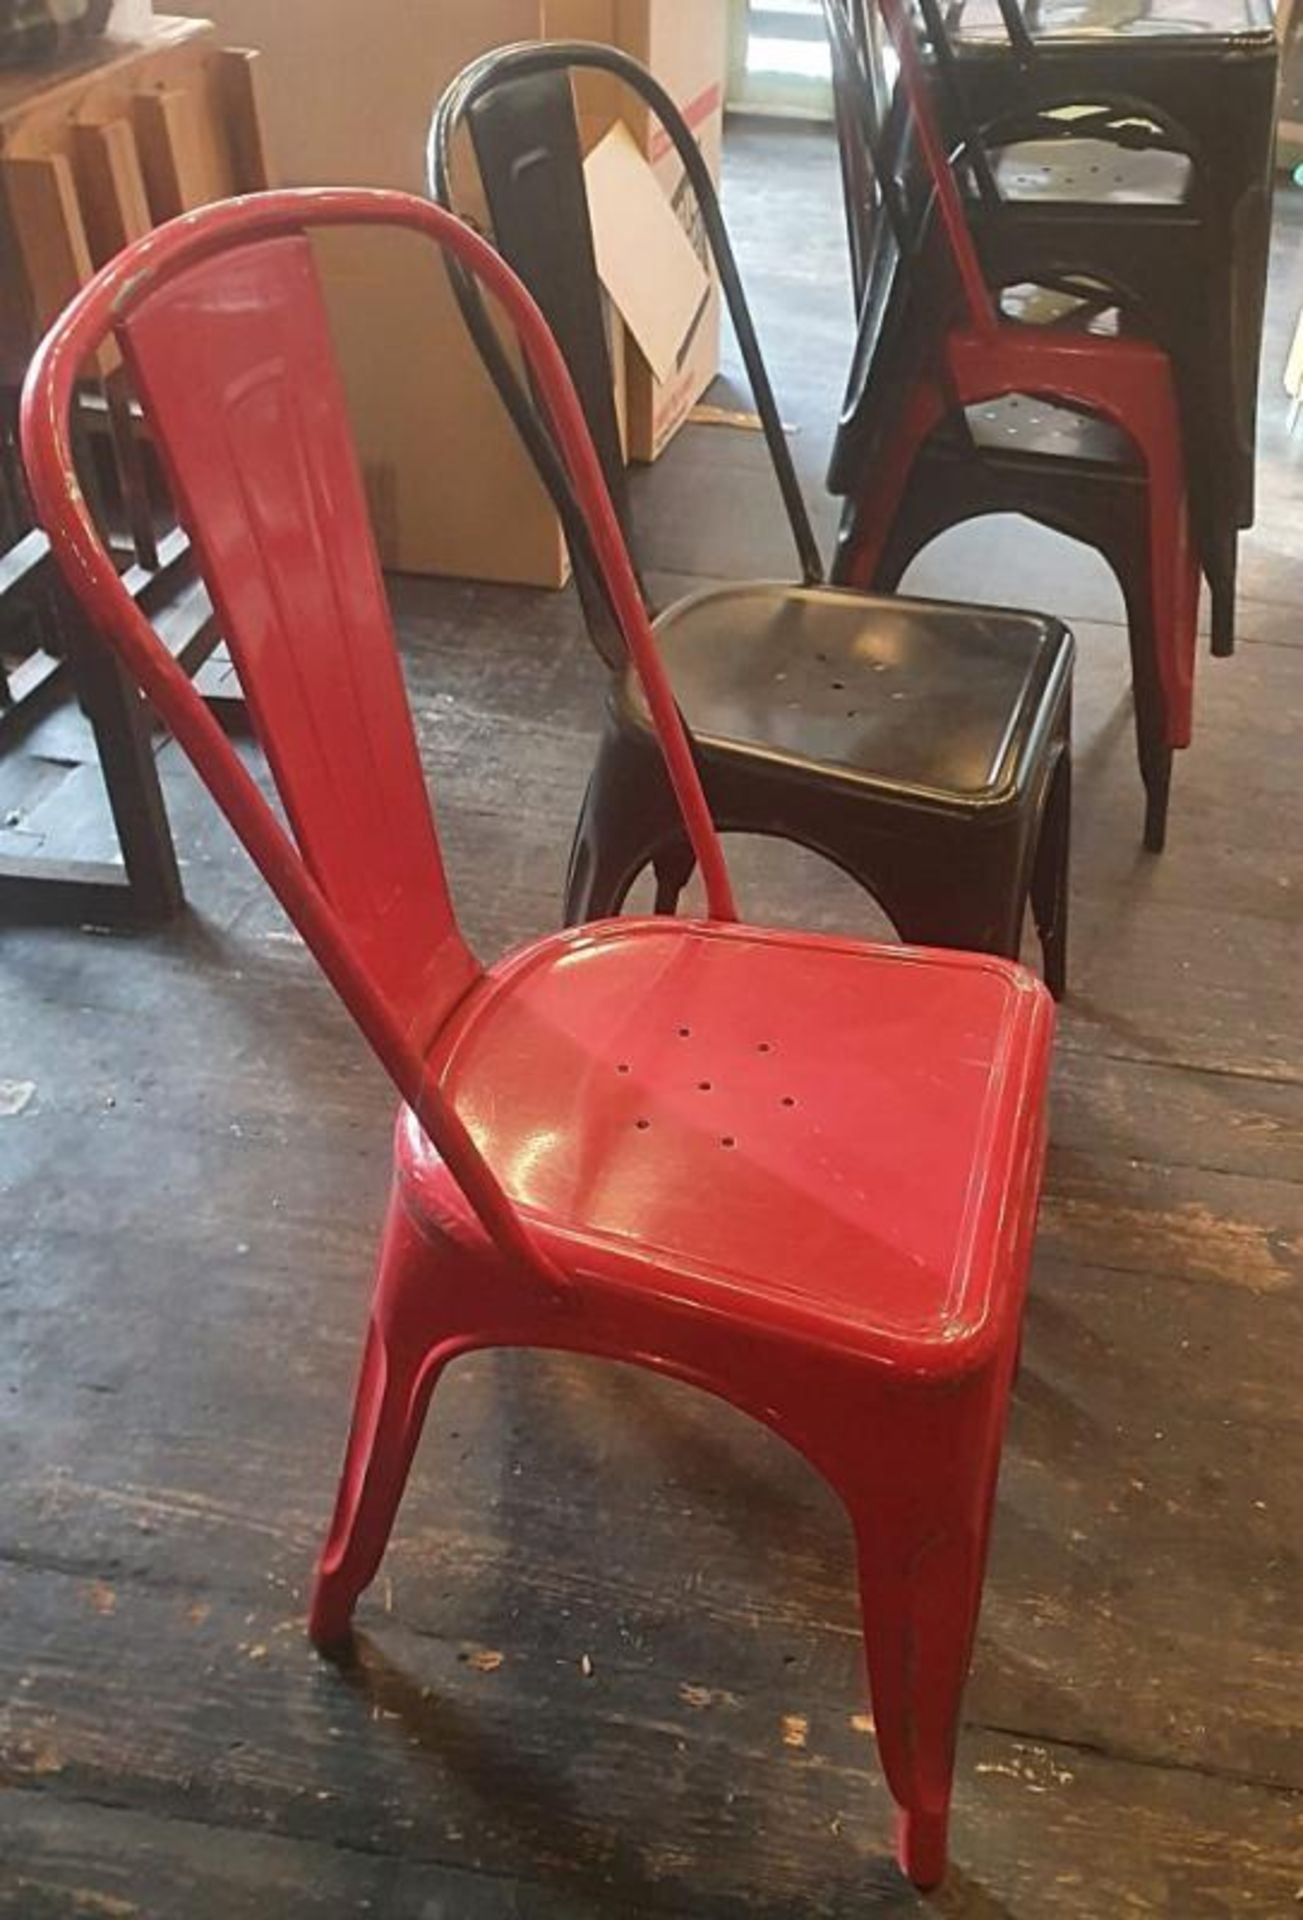 6 x Assorted Rustic Metal Bistro Chairs - Includes 2 x In Red, And 4 x In Black - Recently Taken Fro - Image 2 of 5